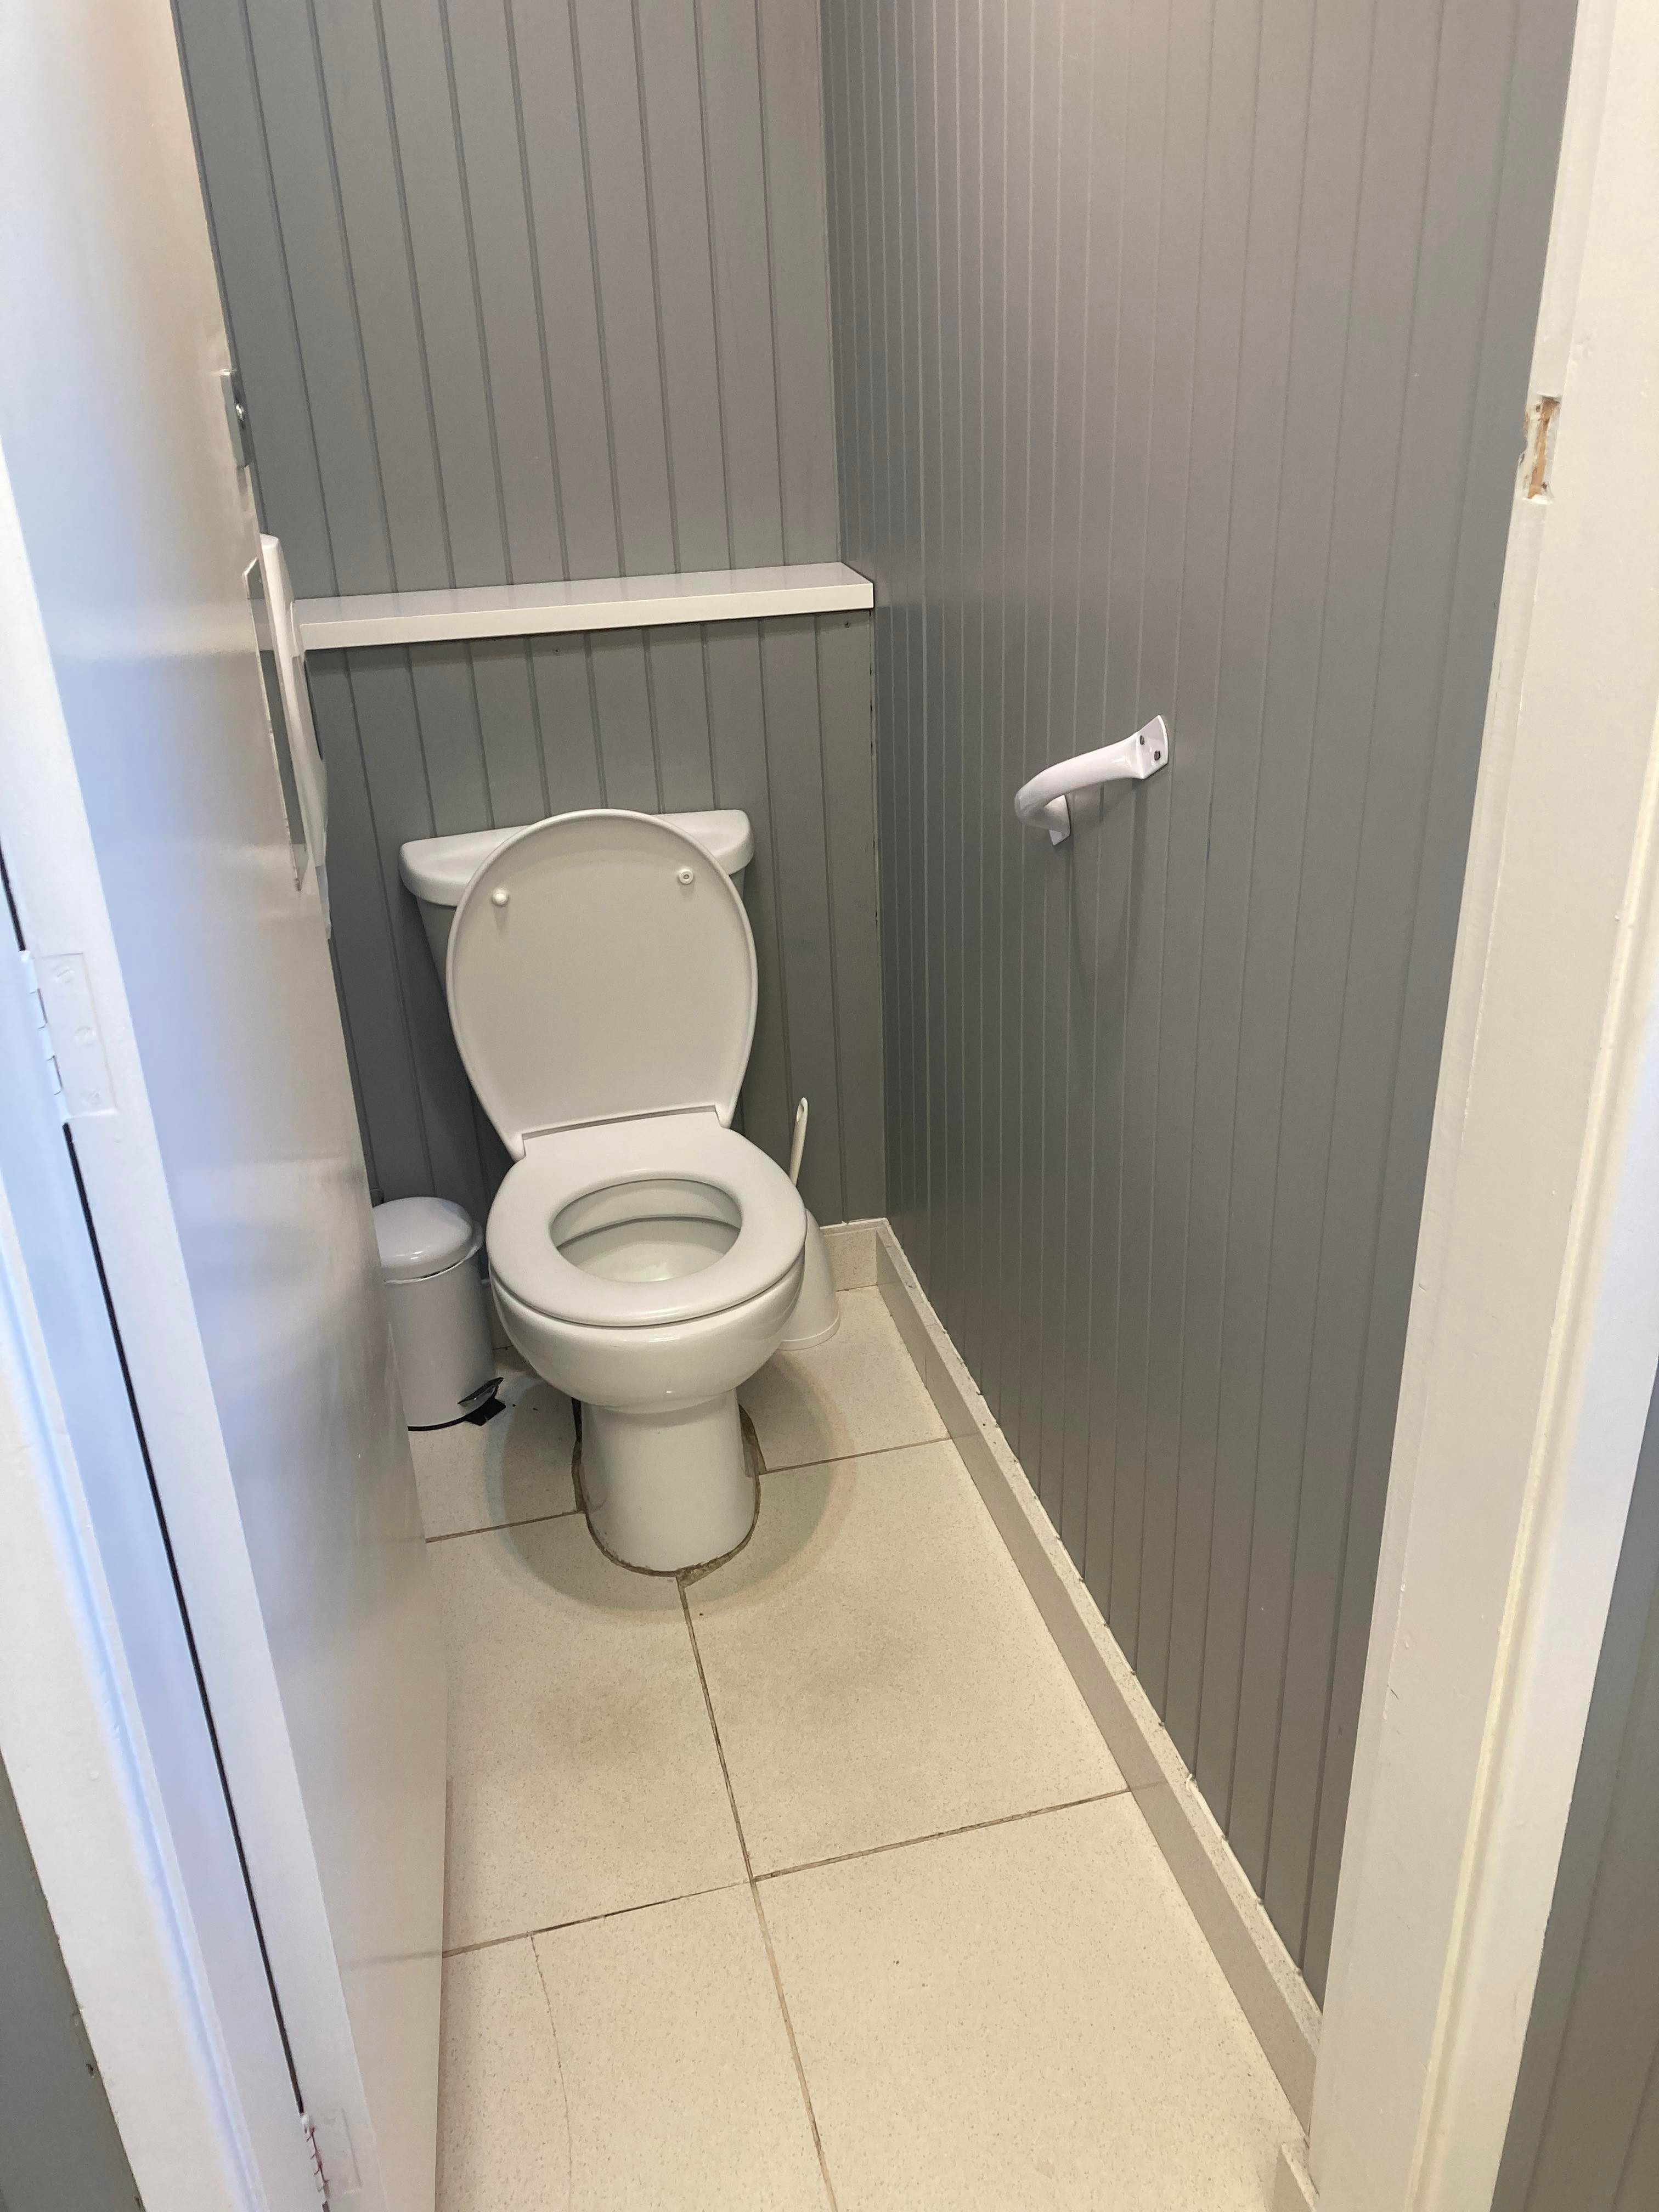 A single cubical ladies toilet with barely enough room to stand and close the door but certainly not enough for a wheelchair. There is a grab rail on the wall next to the toilet.